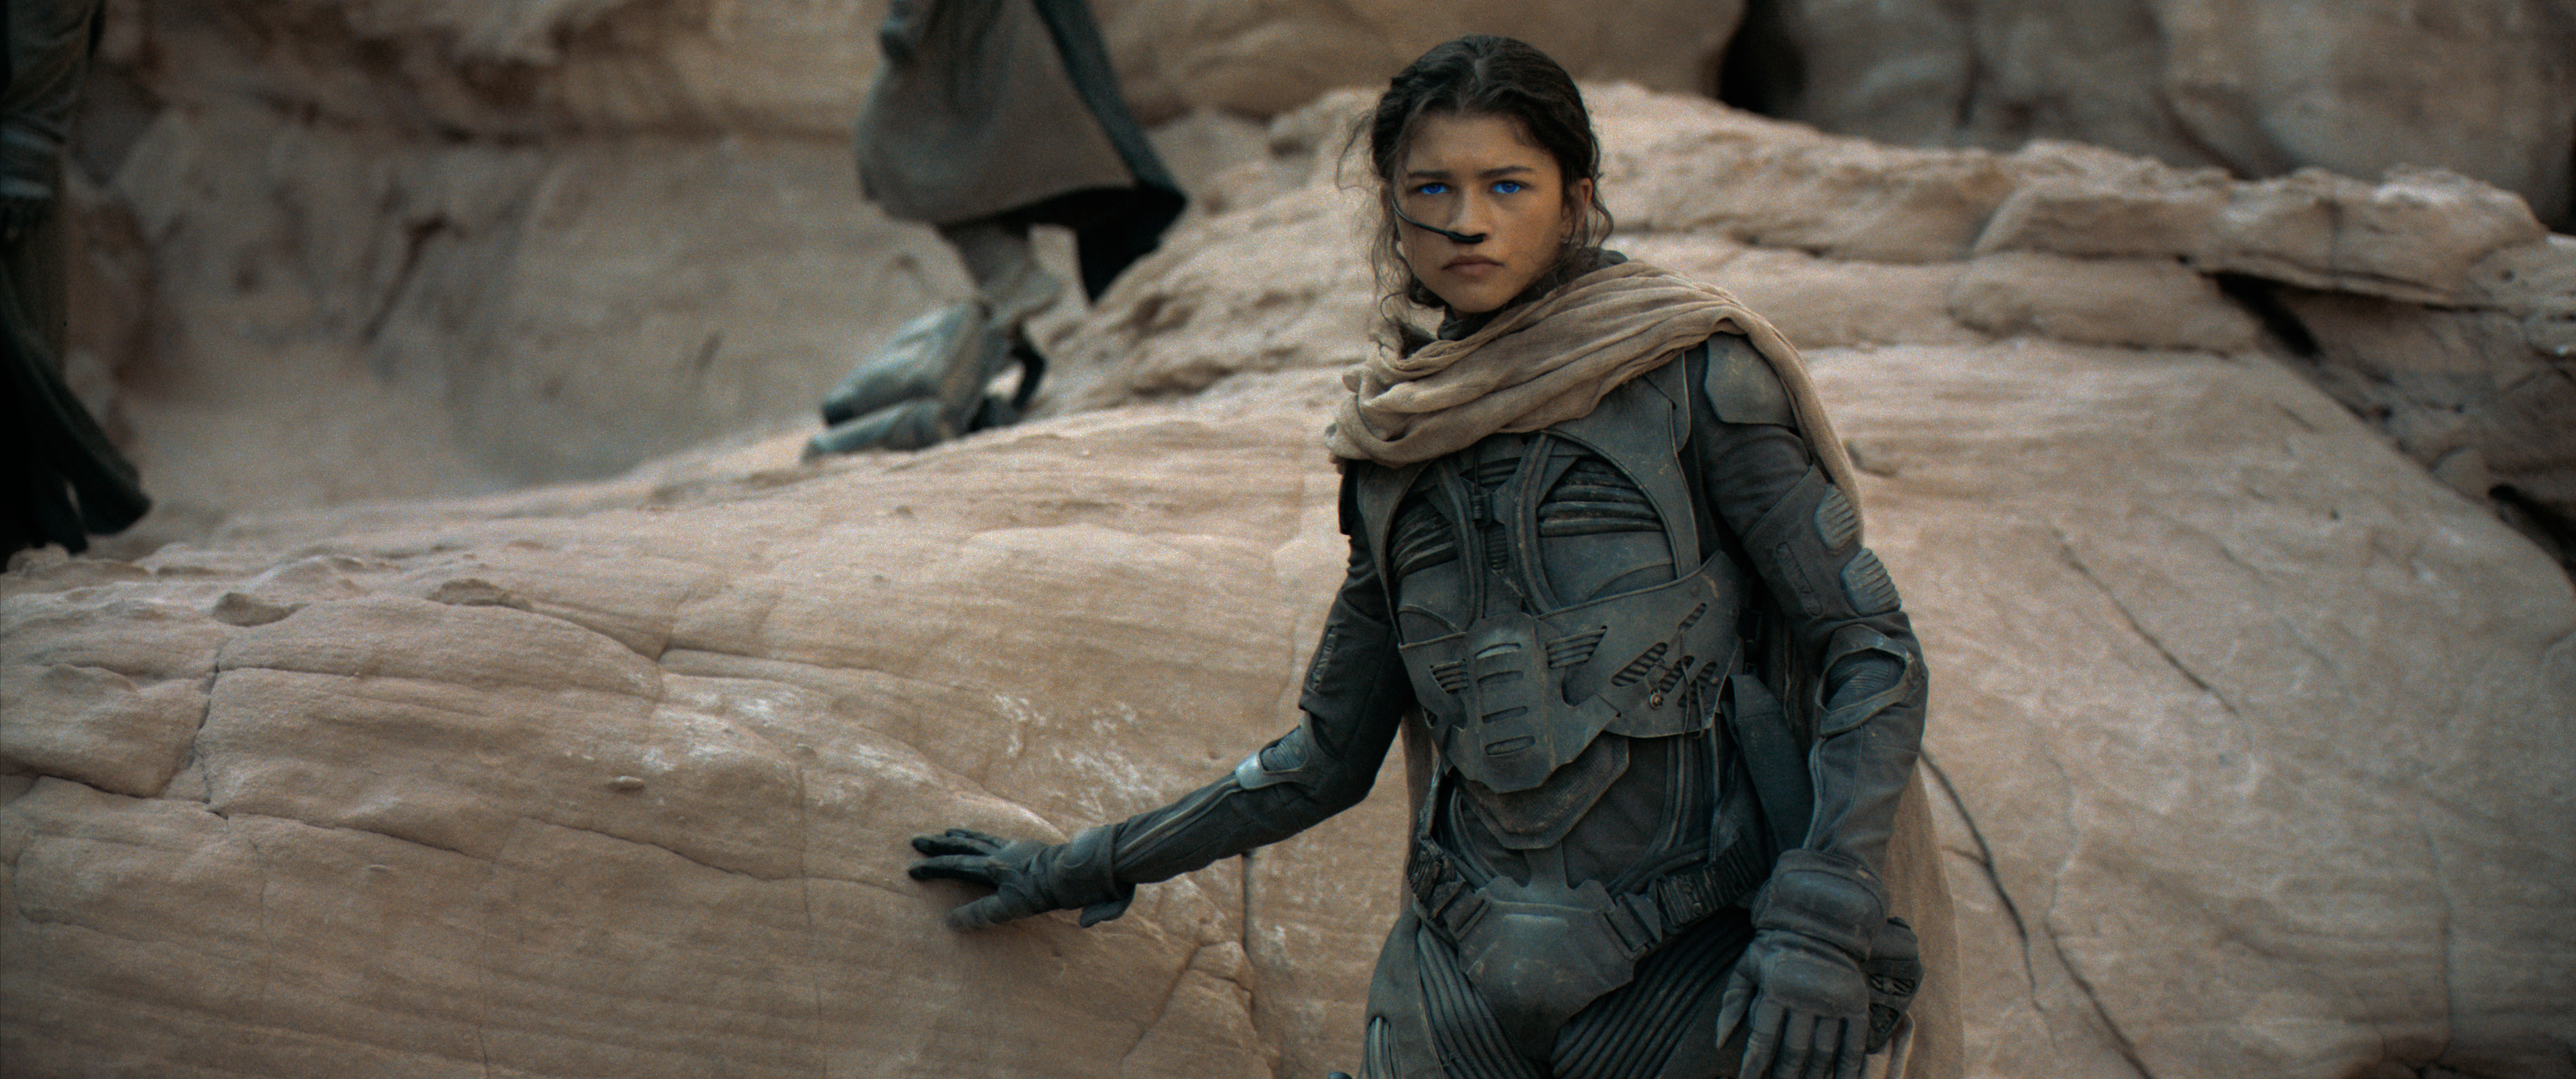 Zendaya as Chani in Denis Villeneuve's 'Dune' (Courtesy of Warner Bros. Pictures and Legendary Pictures)